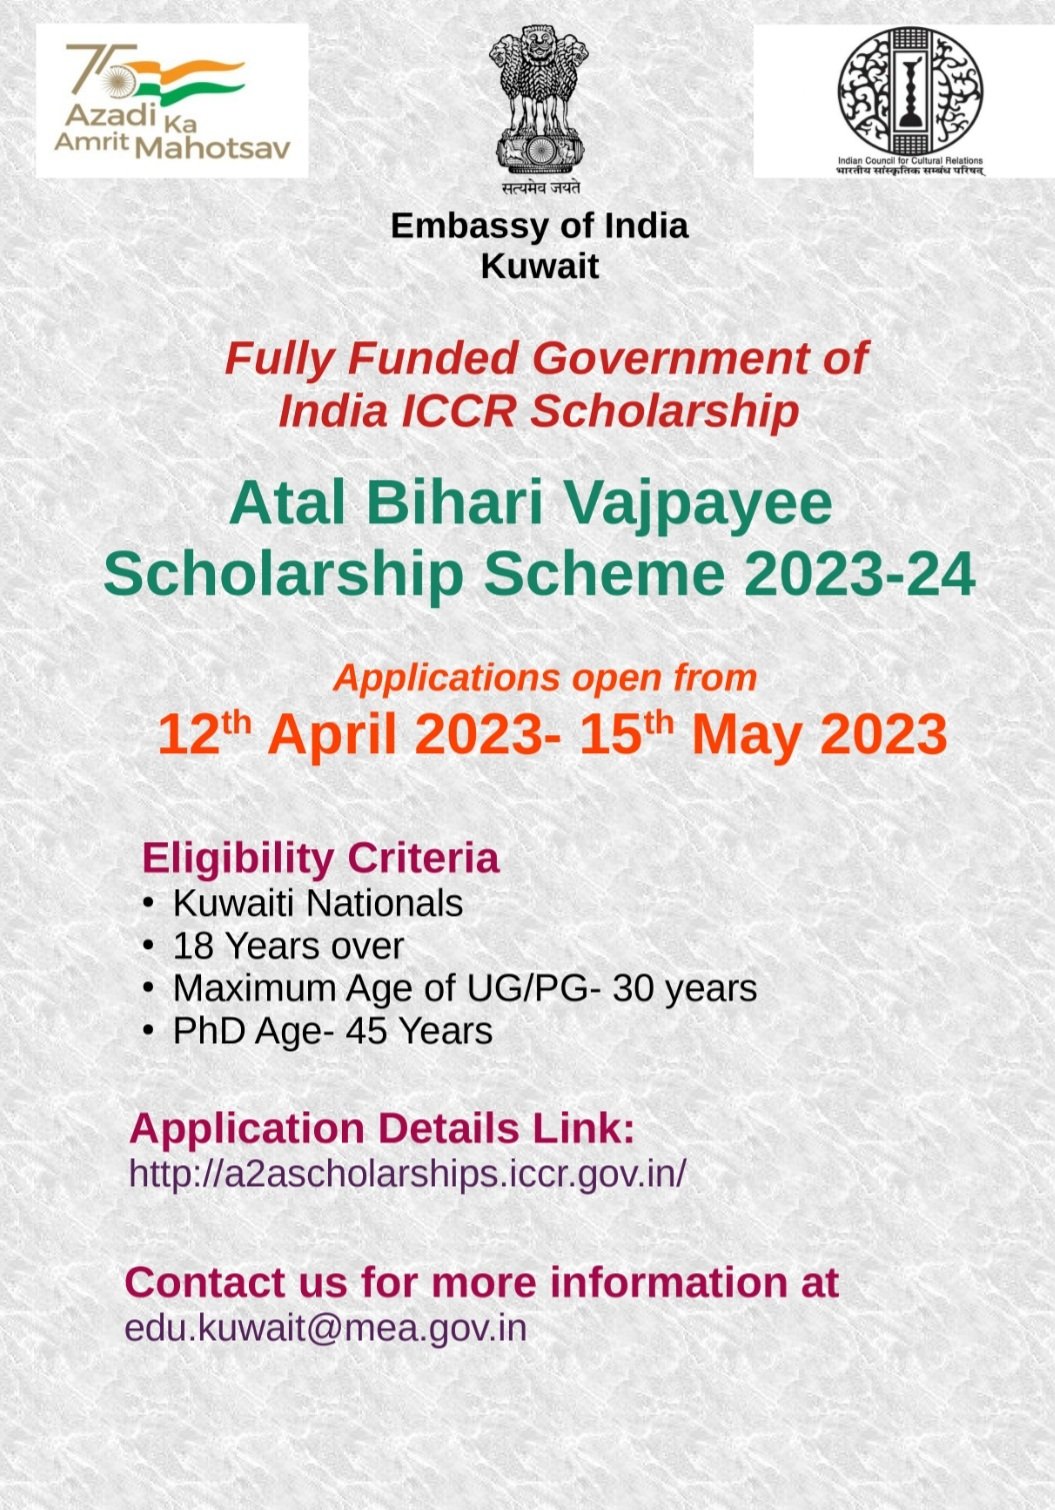 Apply for ICCR Scholarship 2023-24 for Kuwait